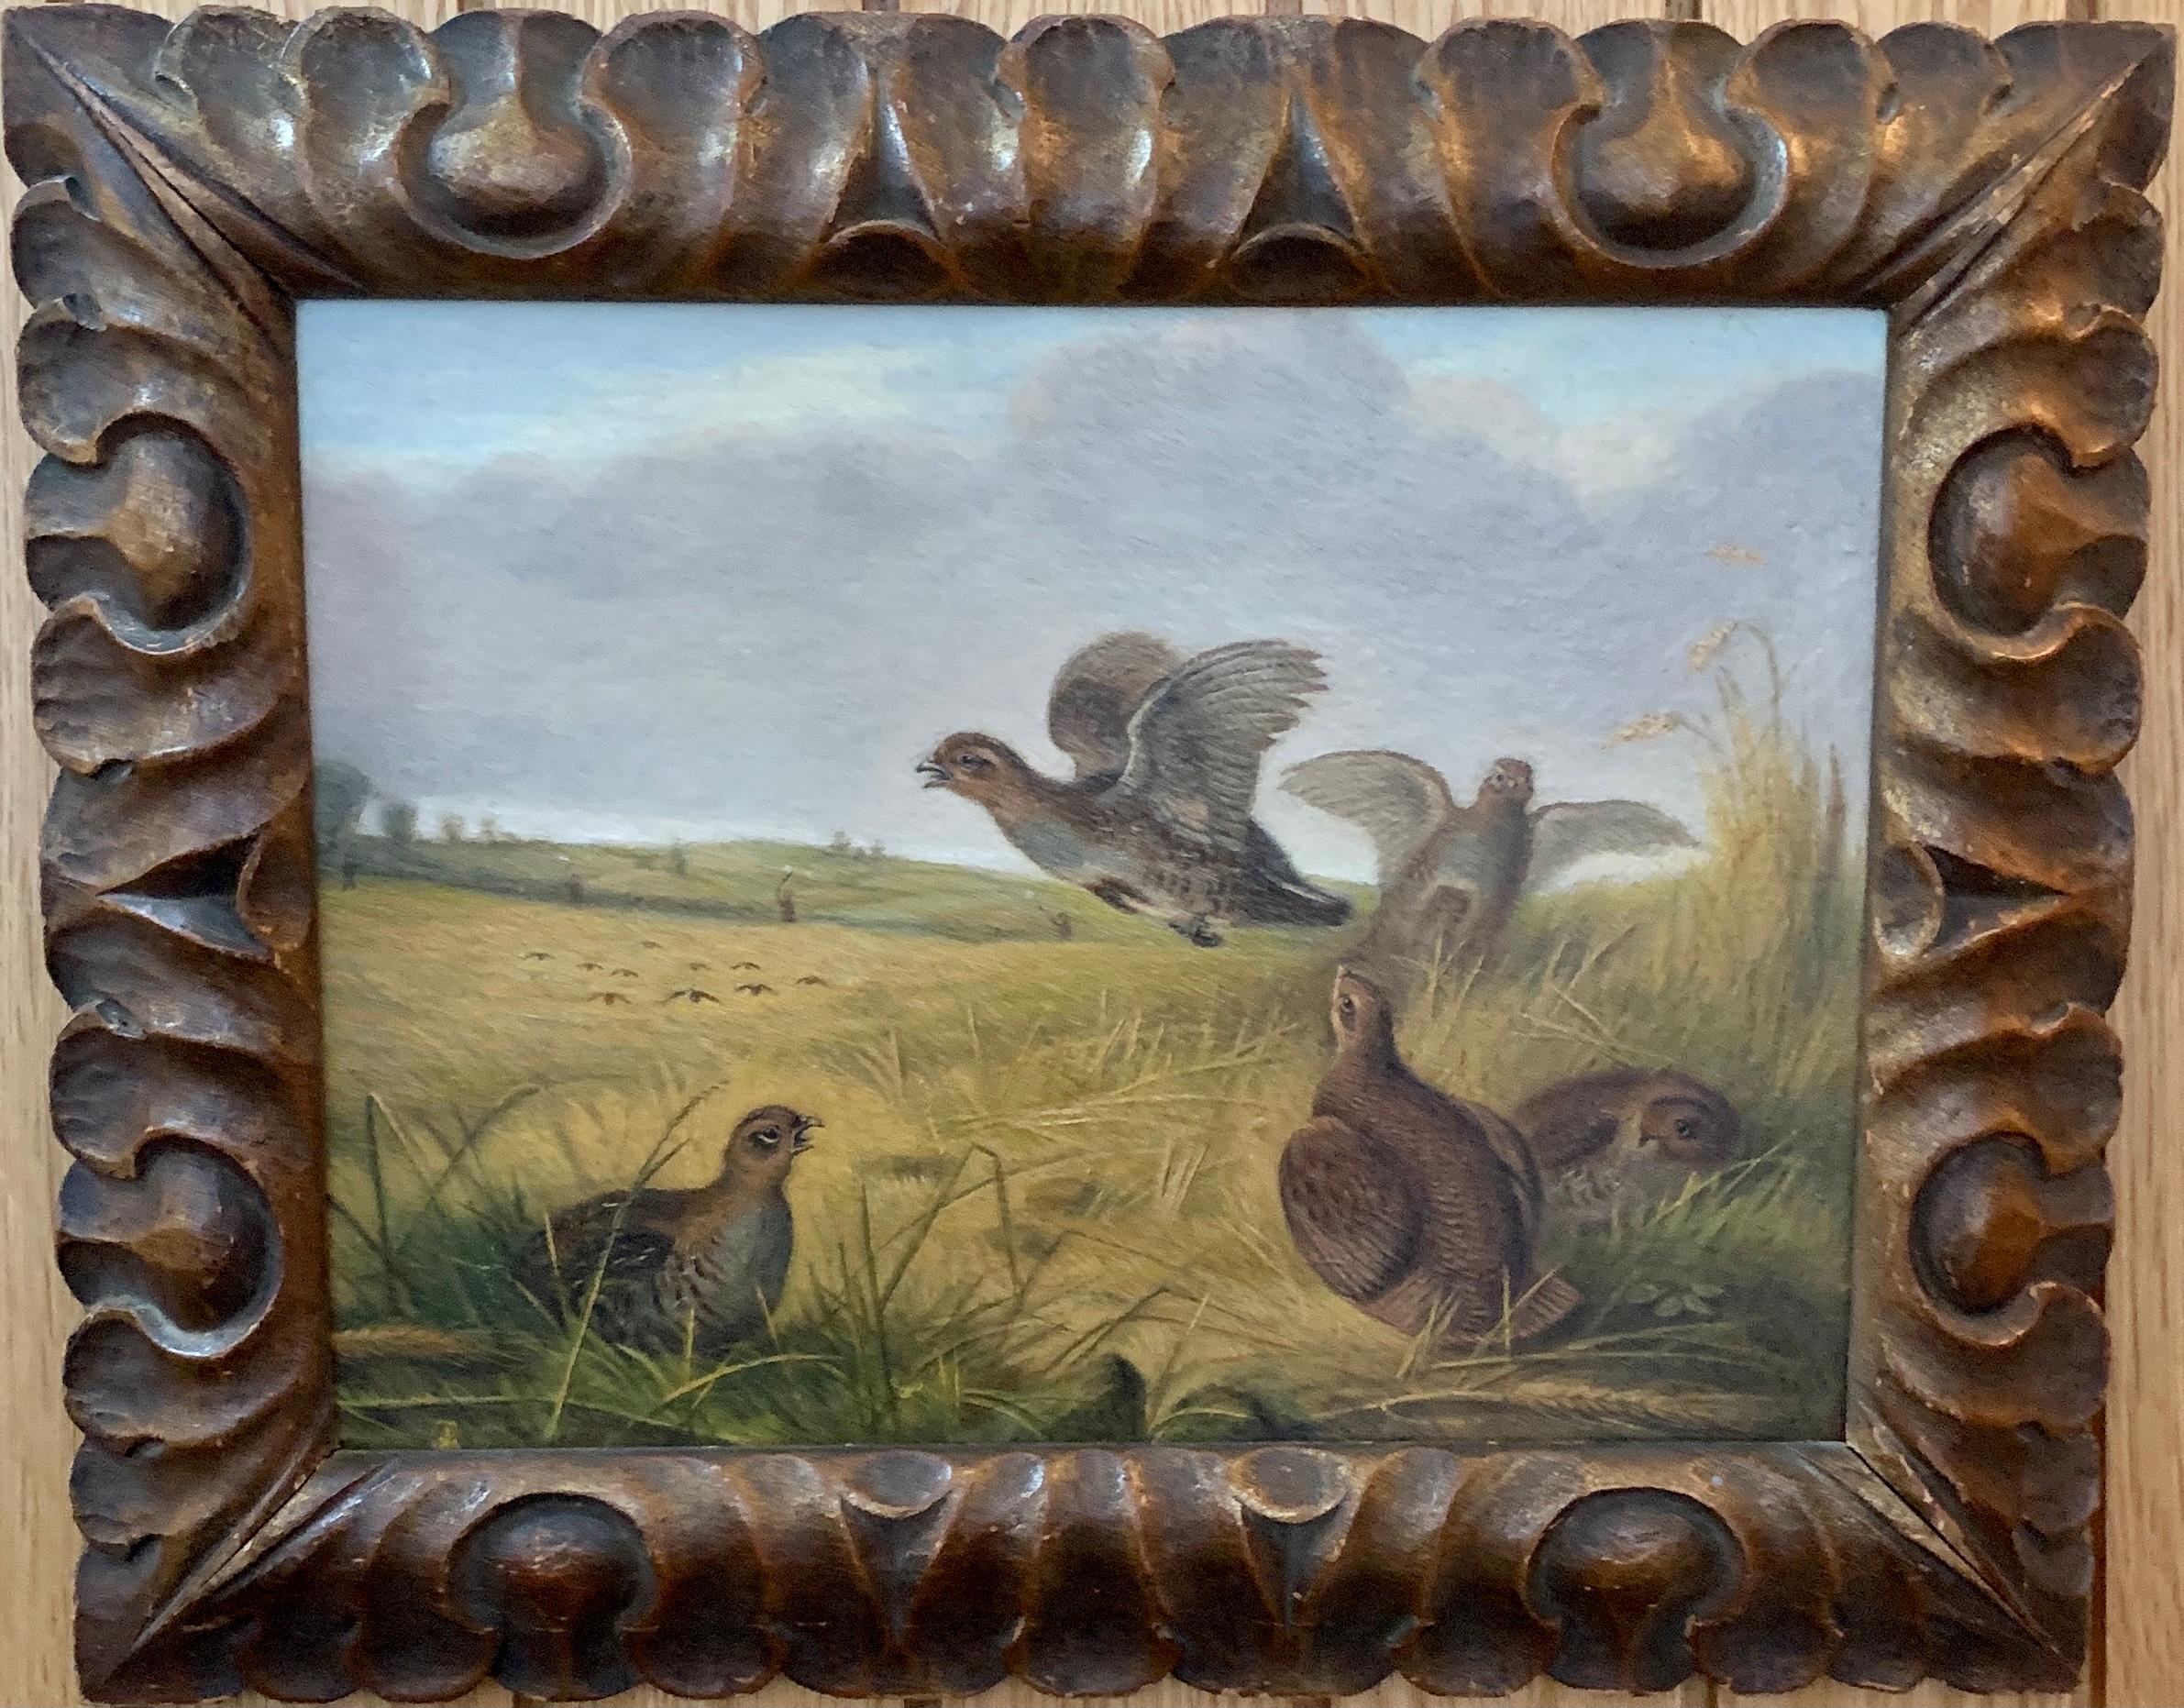 Follower of Stephen Elmer Animal Painting - English 19th century, Pheasants at flight during a shoot in an English landscape